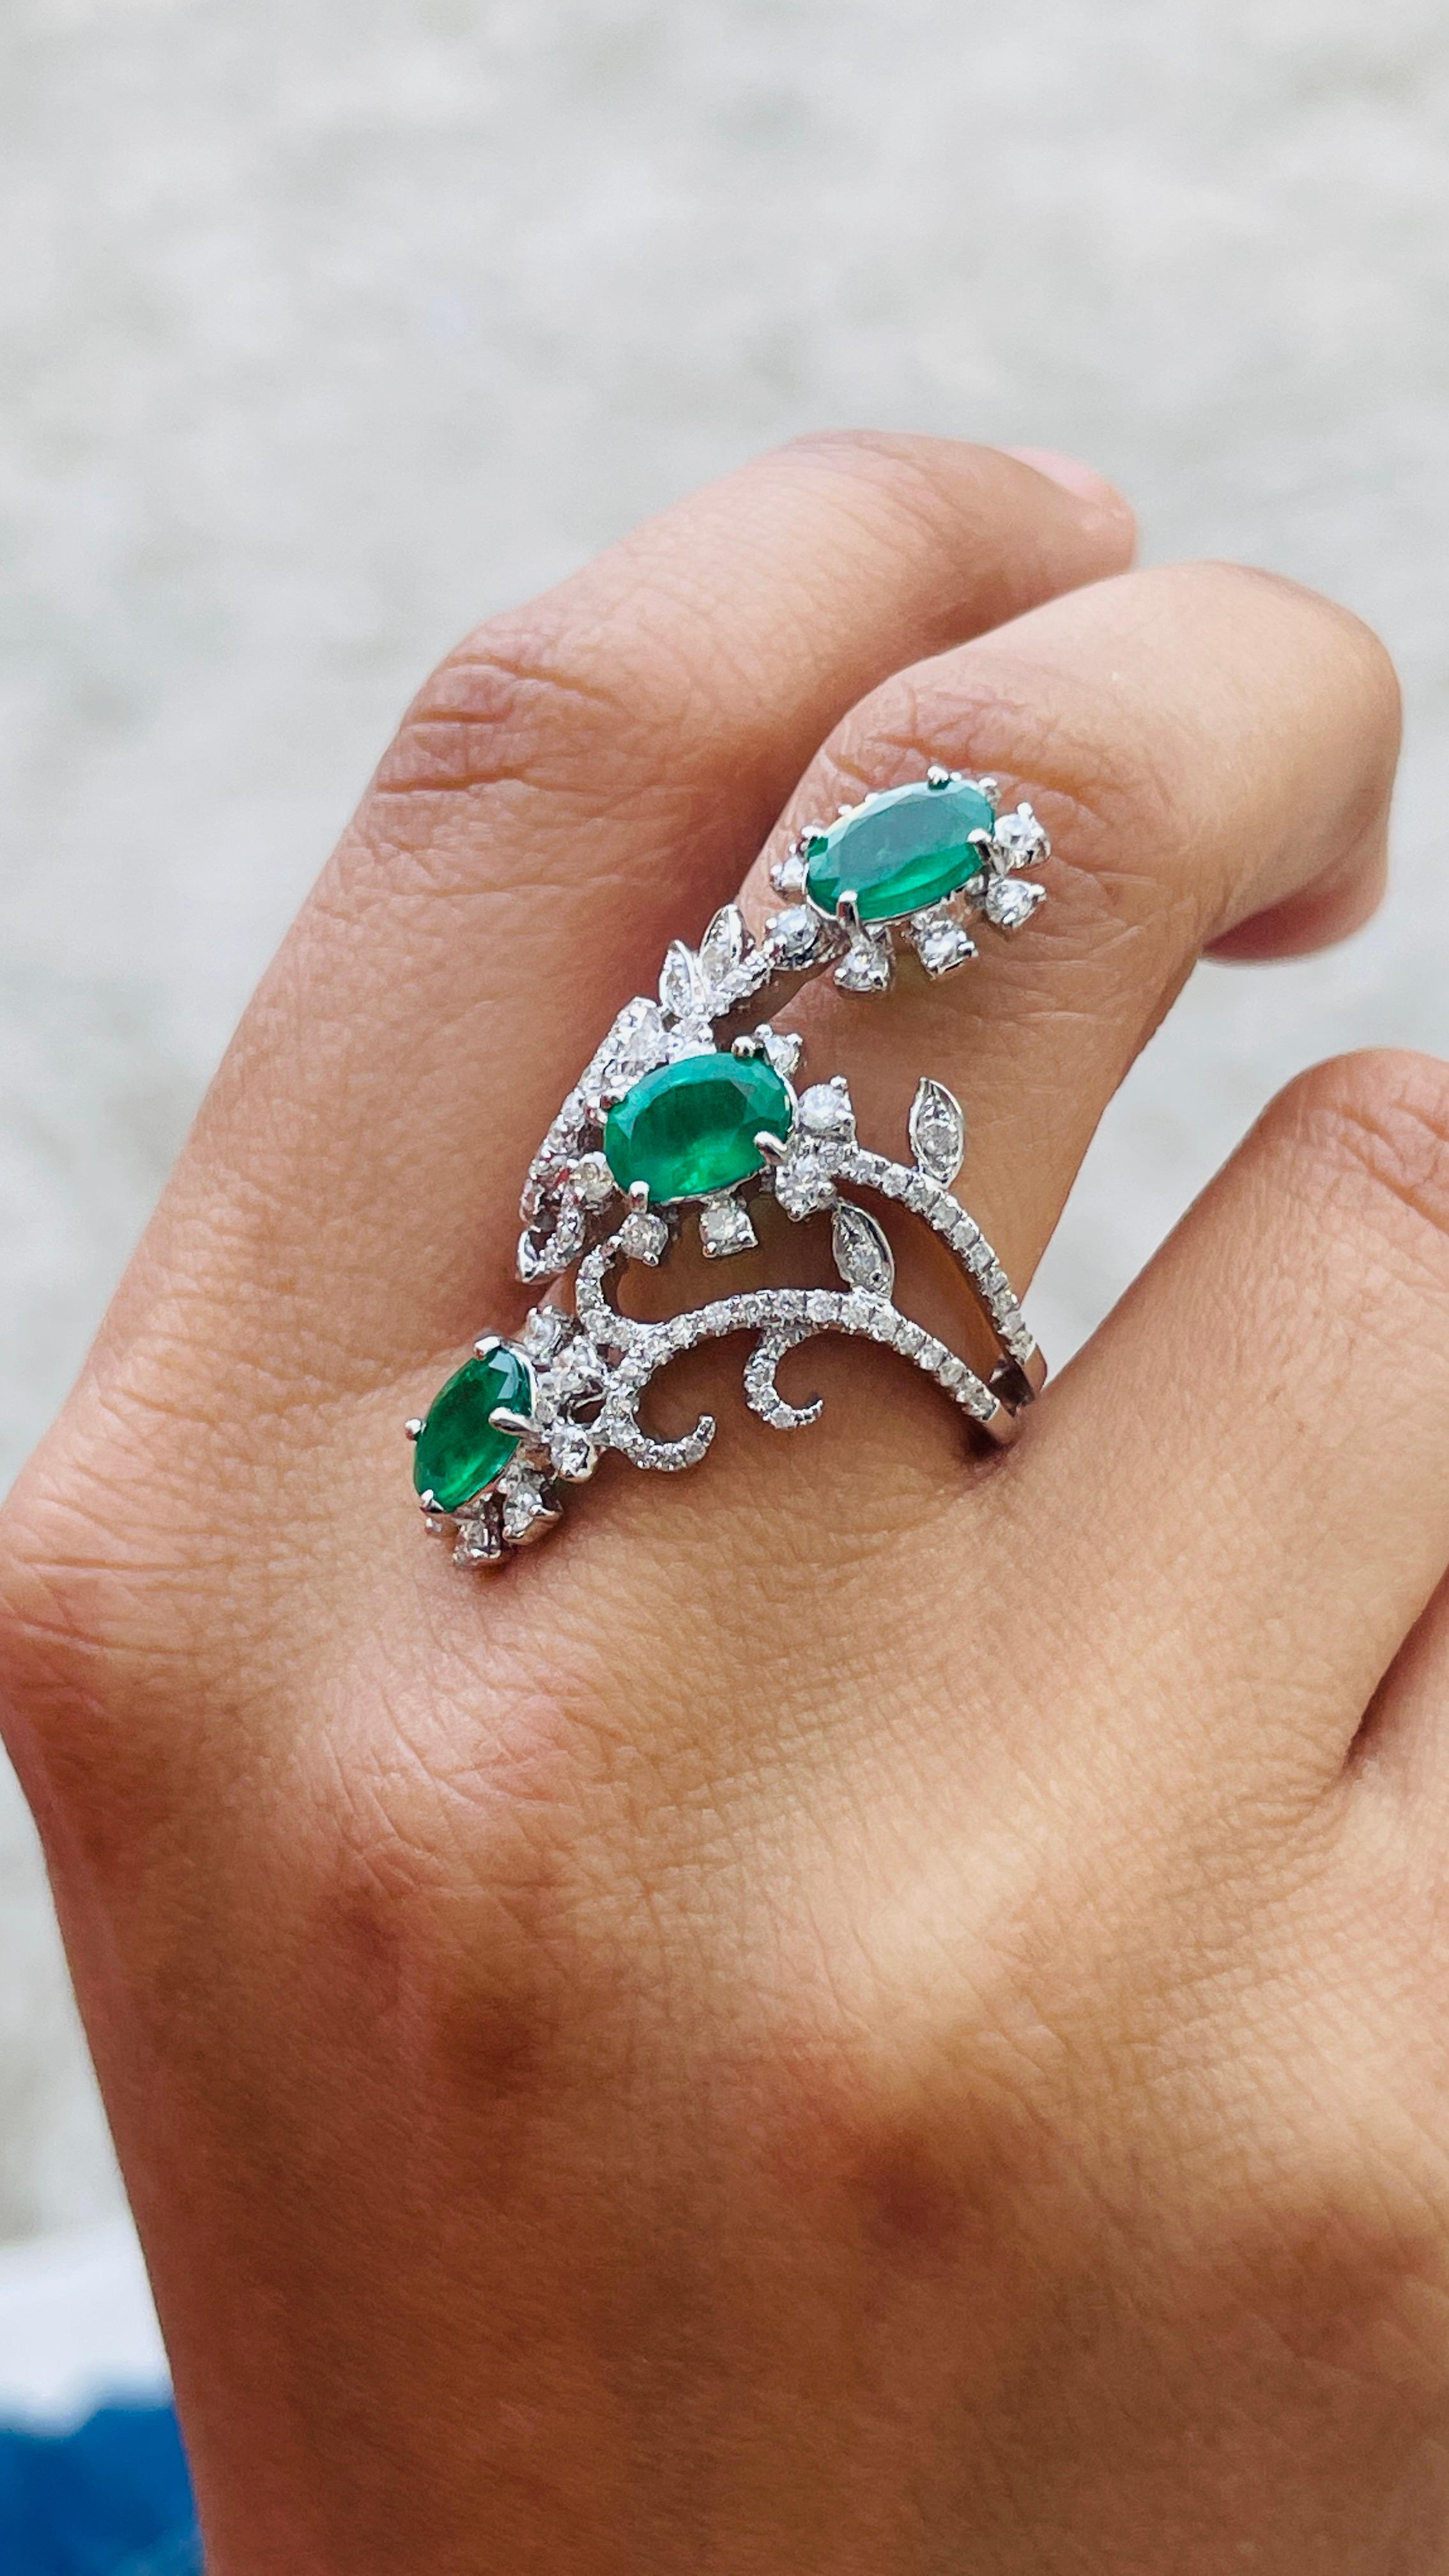 For Sale:  14K White Gold Three Stone Emerald and Diamond Cocktail Ring 5